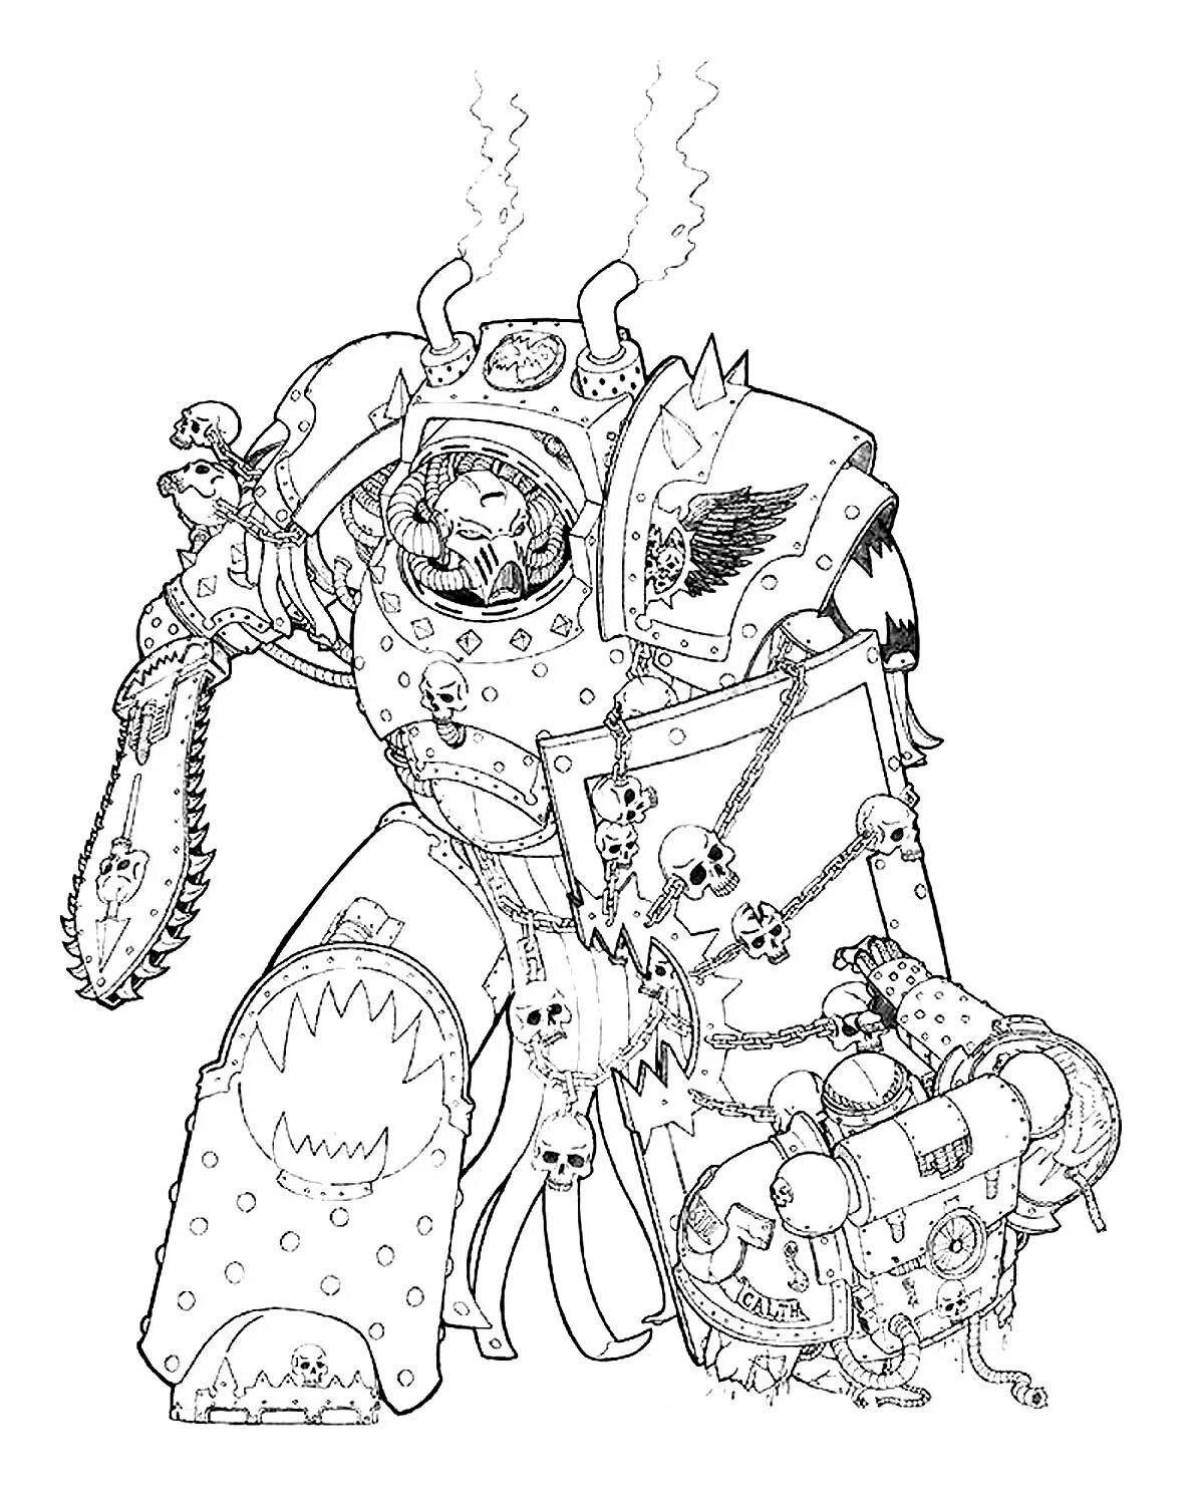 Luxury space marine coloring page